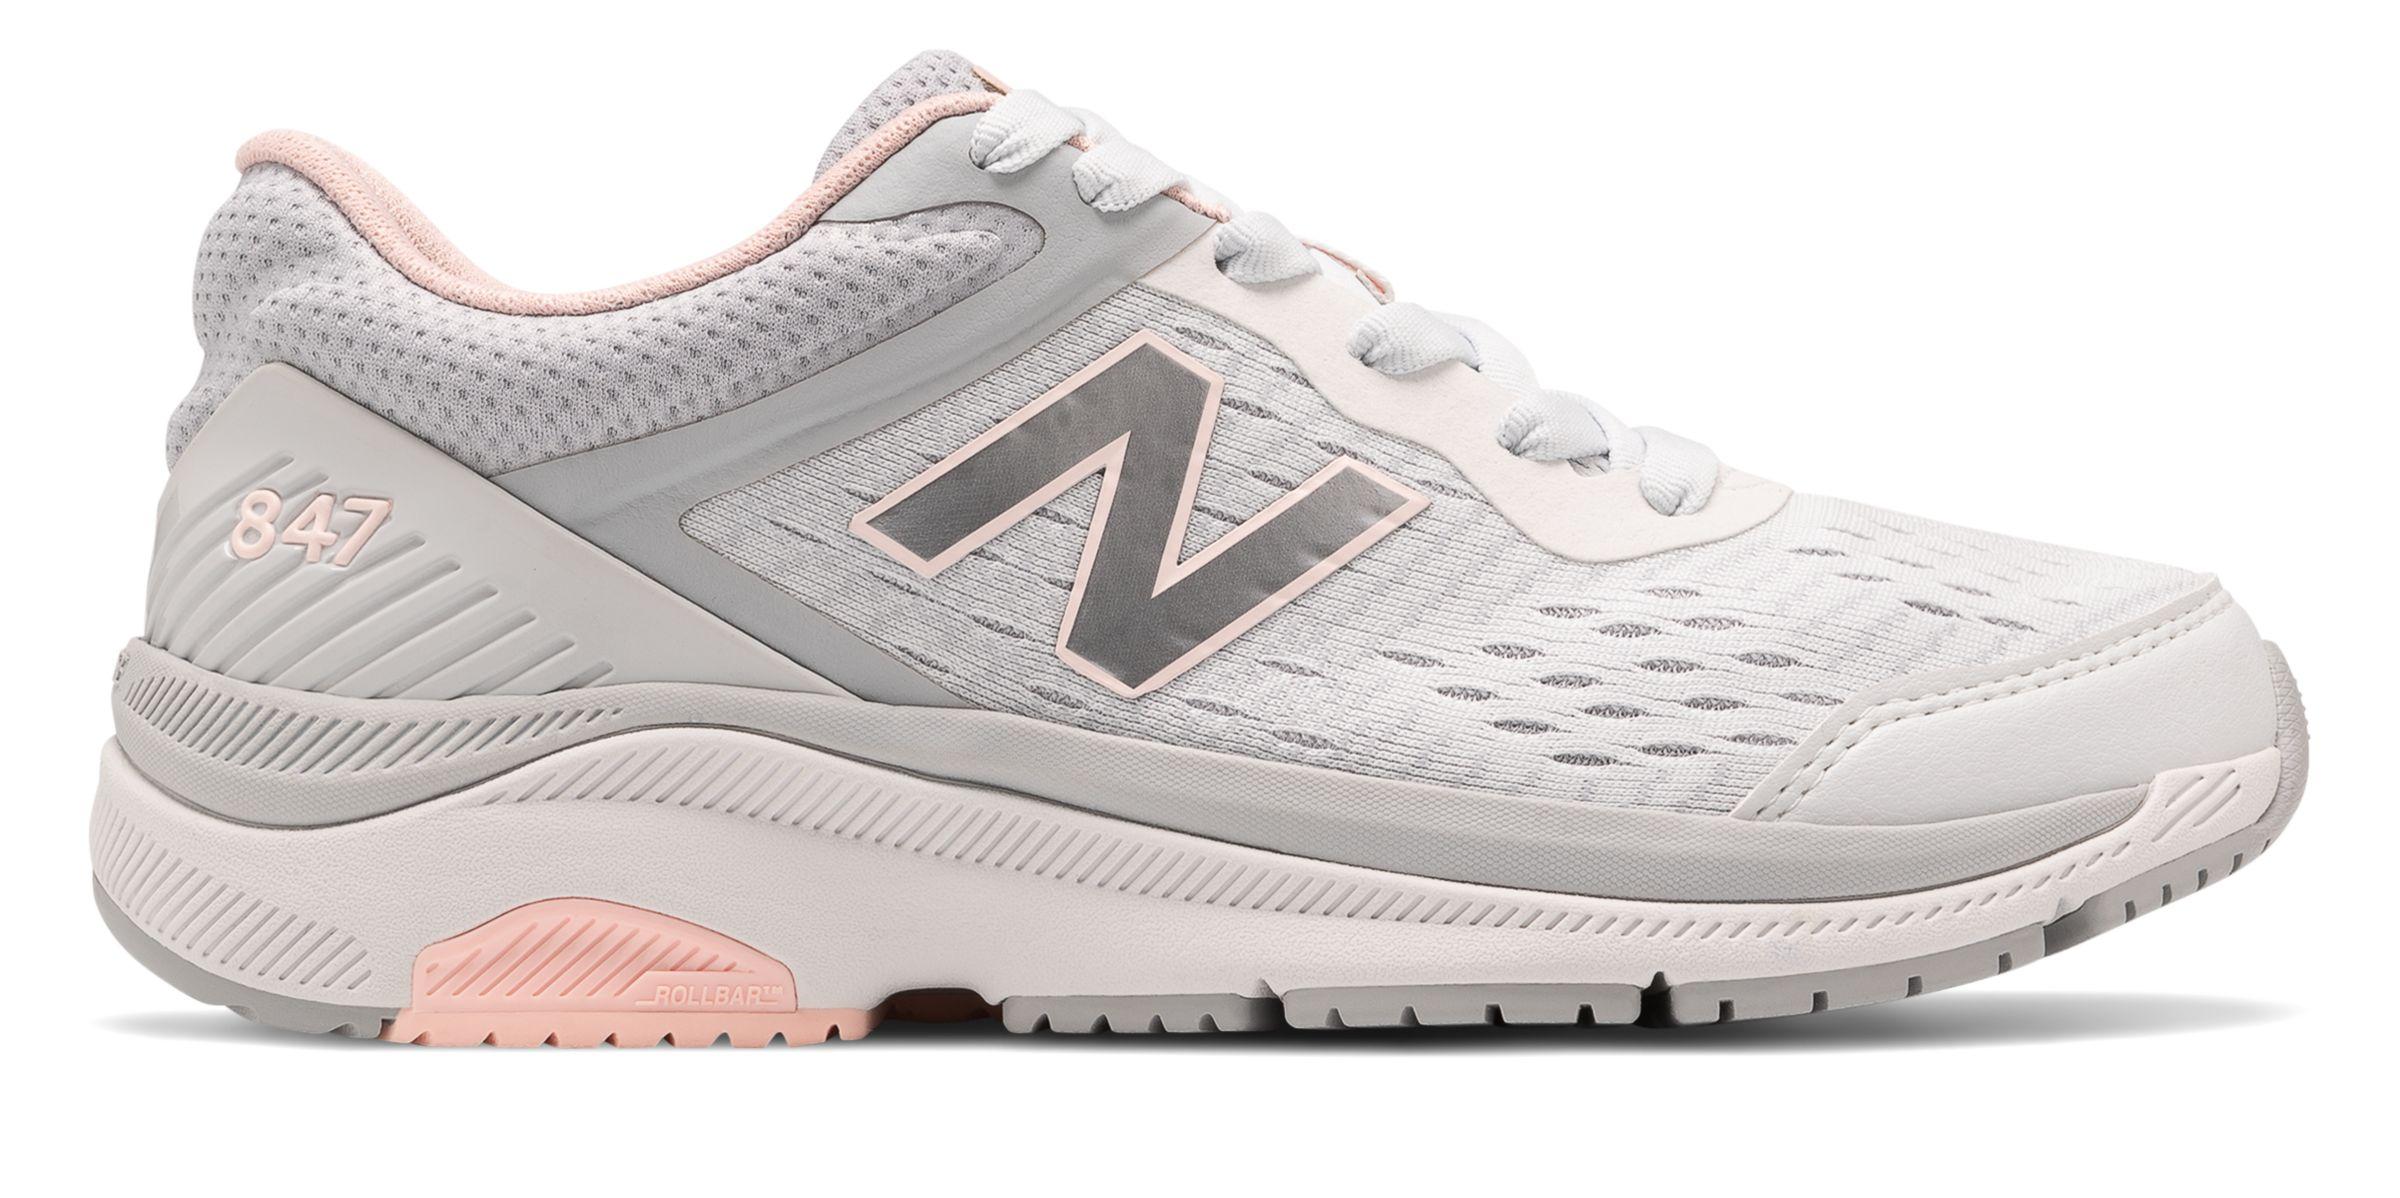 New Balance 847v4 Walking Shoes in Grey/Silver/Pink (Gray) - Lyst